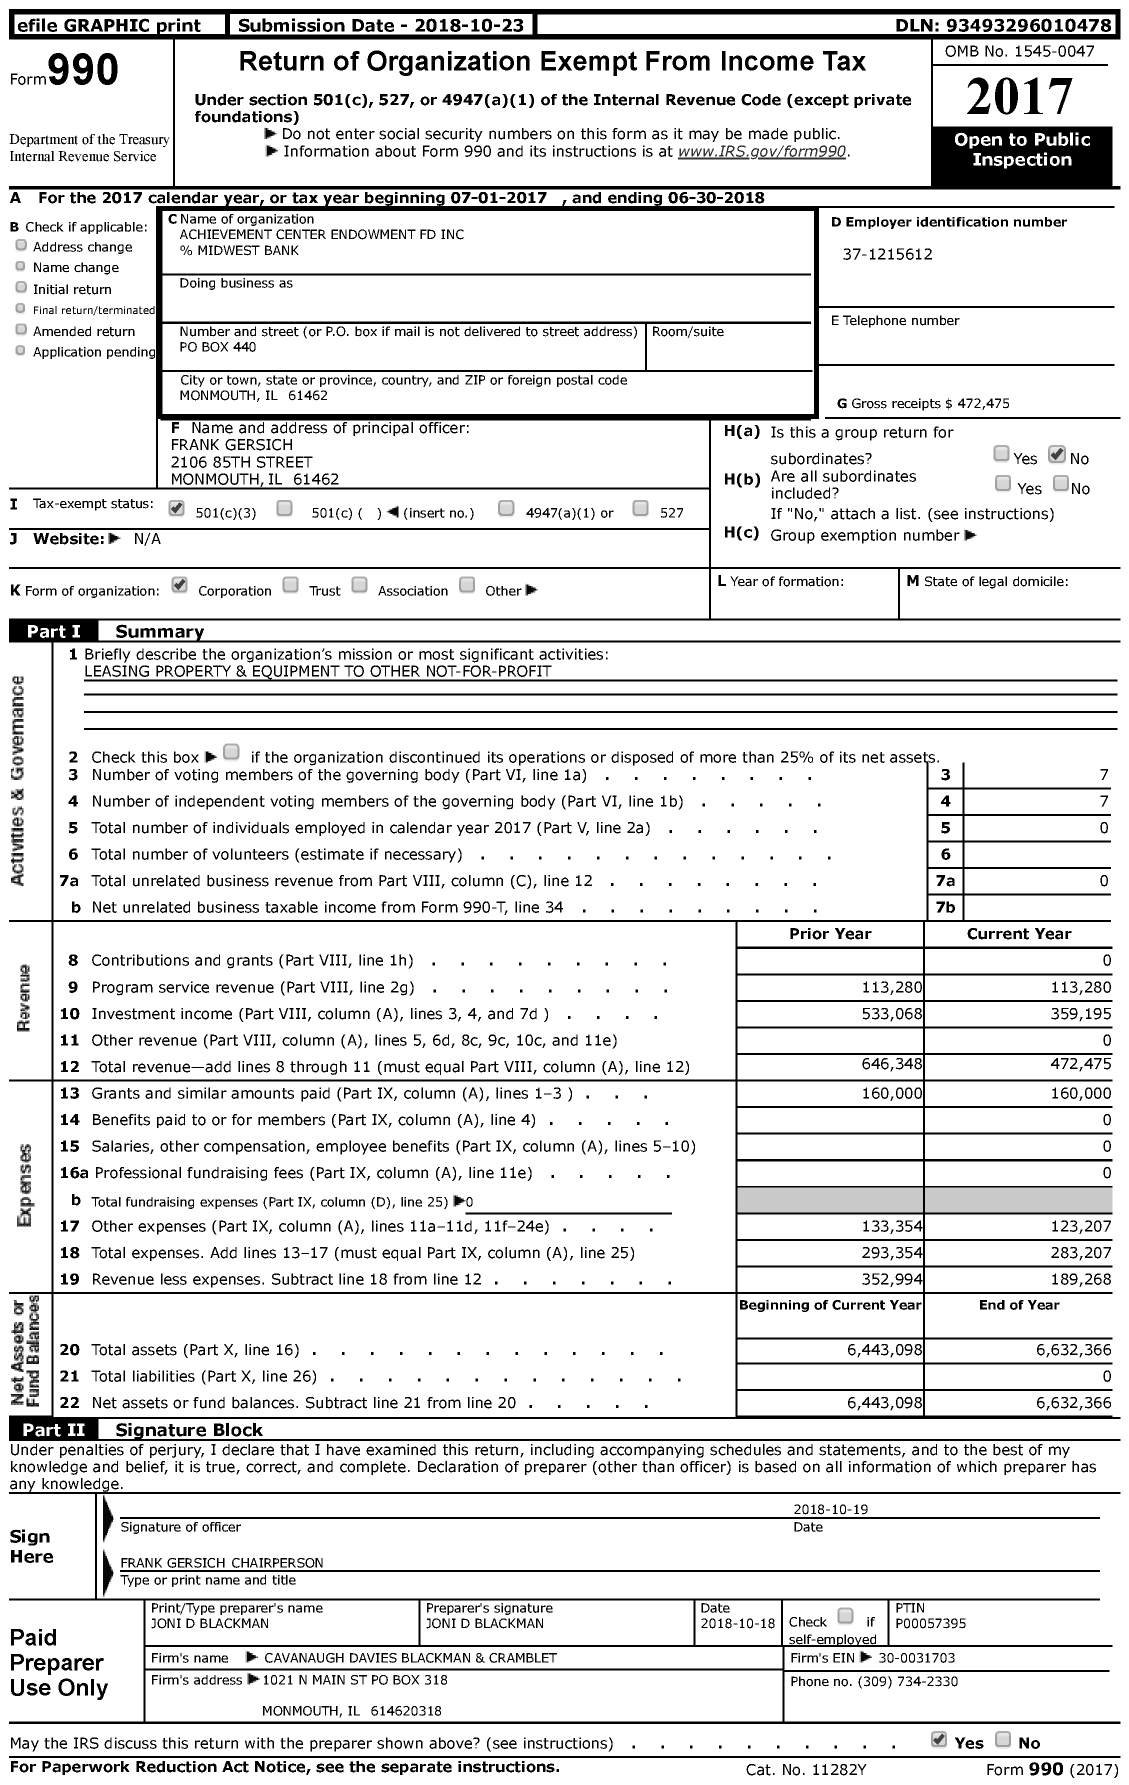 Image of first page of 2017 Form 990 for Achievement Center Endowment Fund